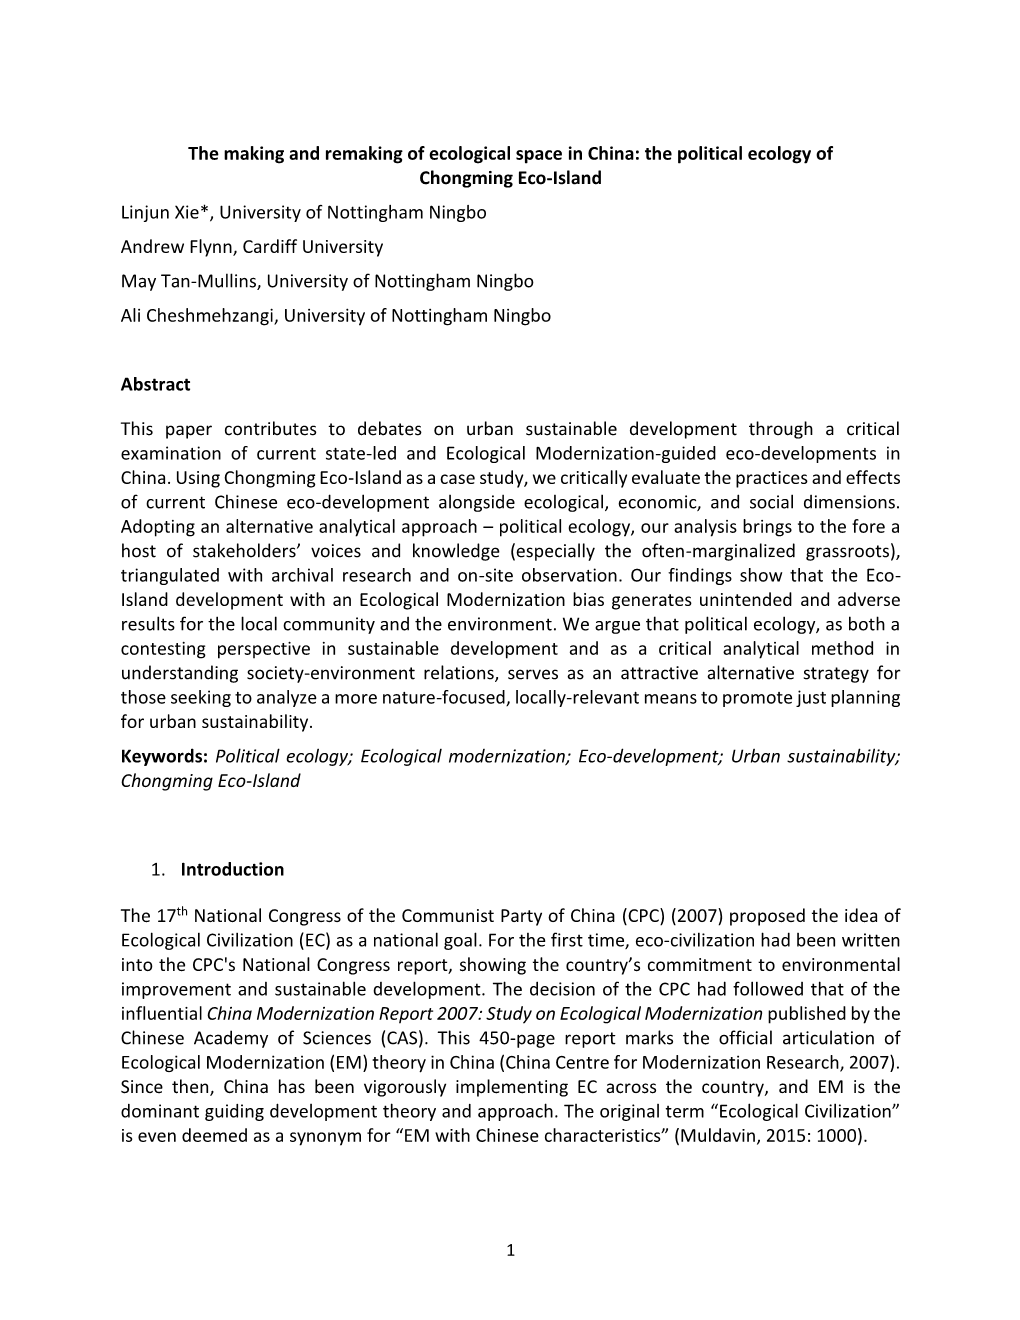 The Political Ecology of Chongming Eco-Island